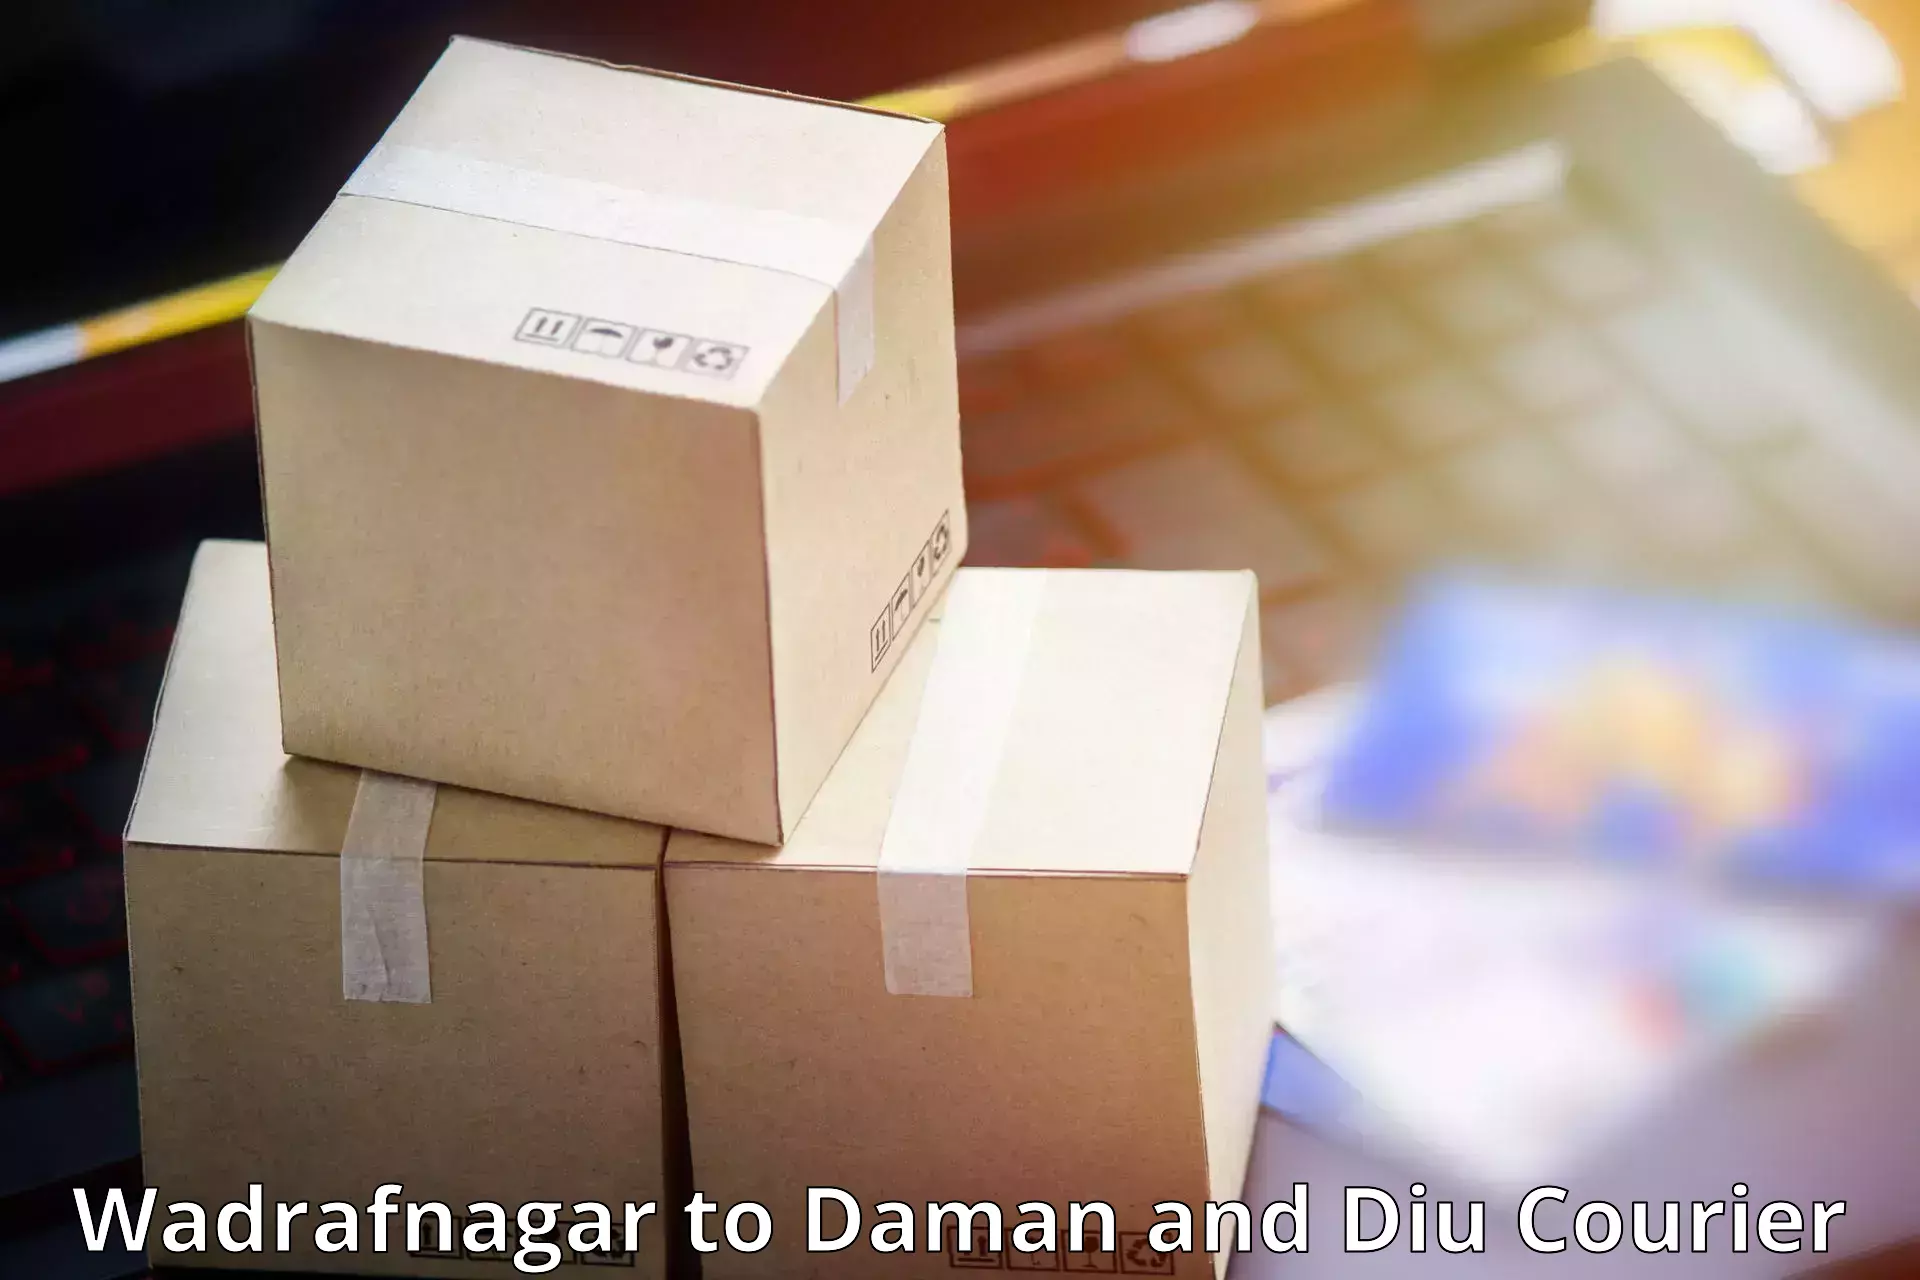 Sustainable courier practices Wadrafnagar to Daman and Diu